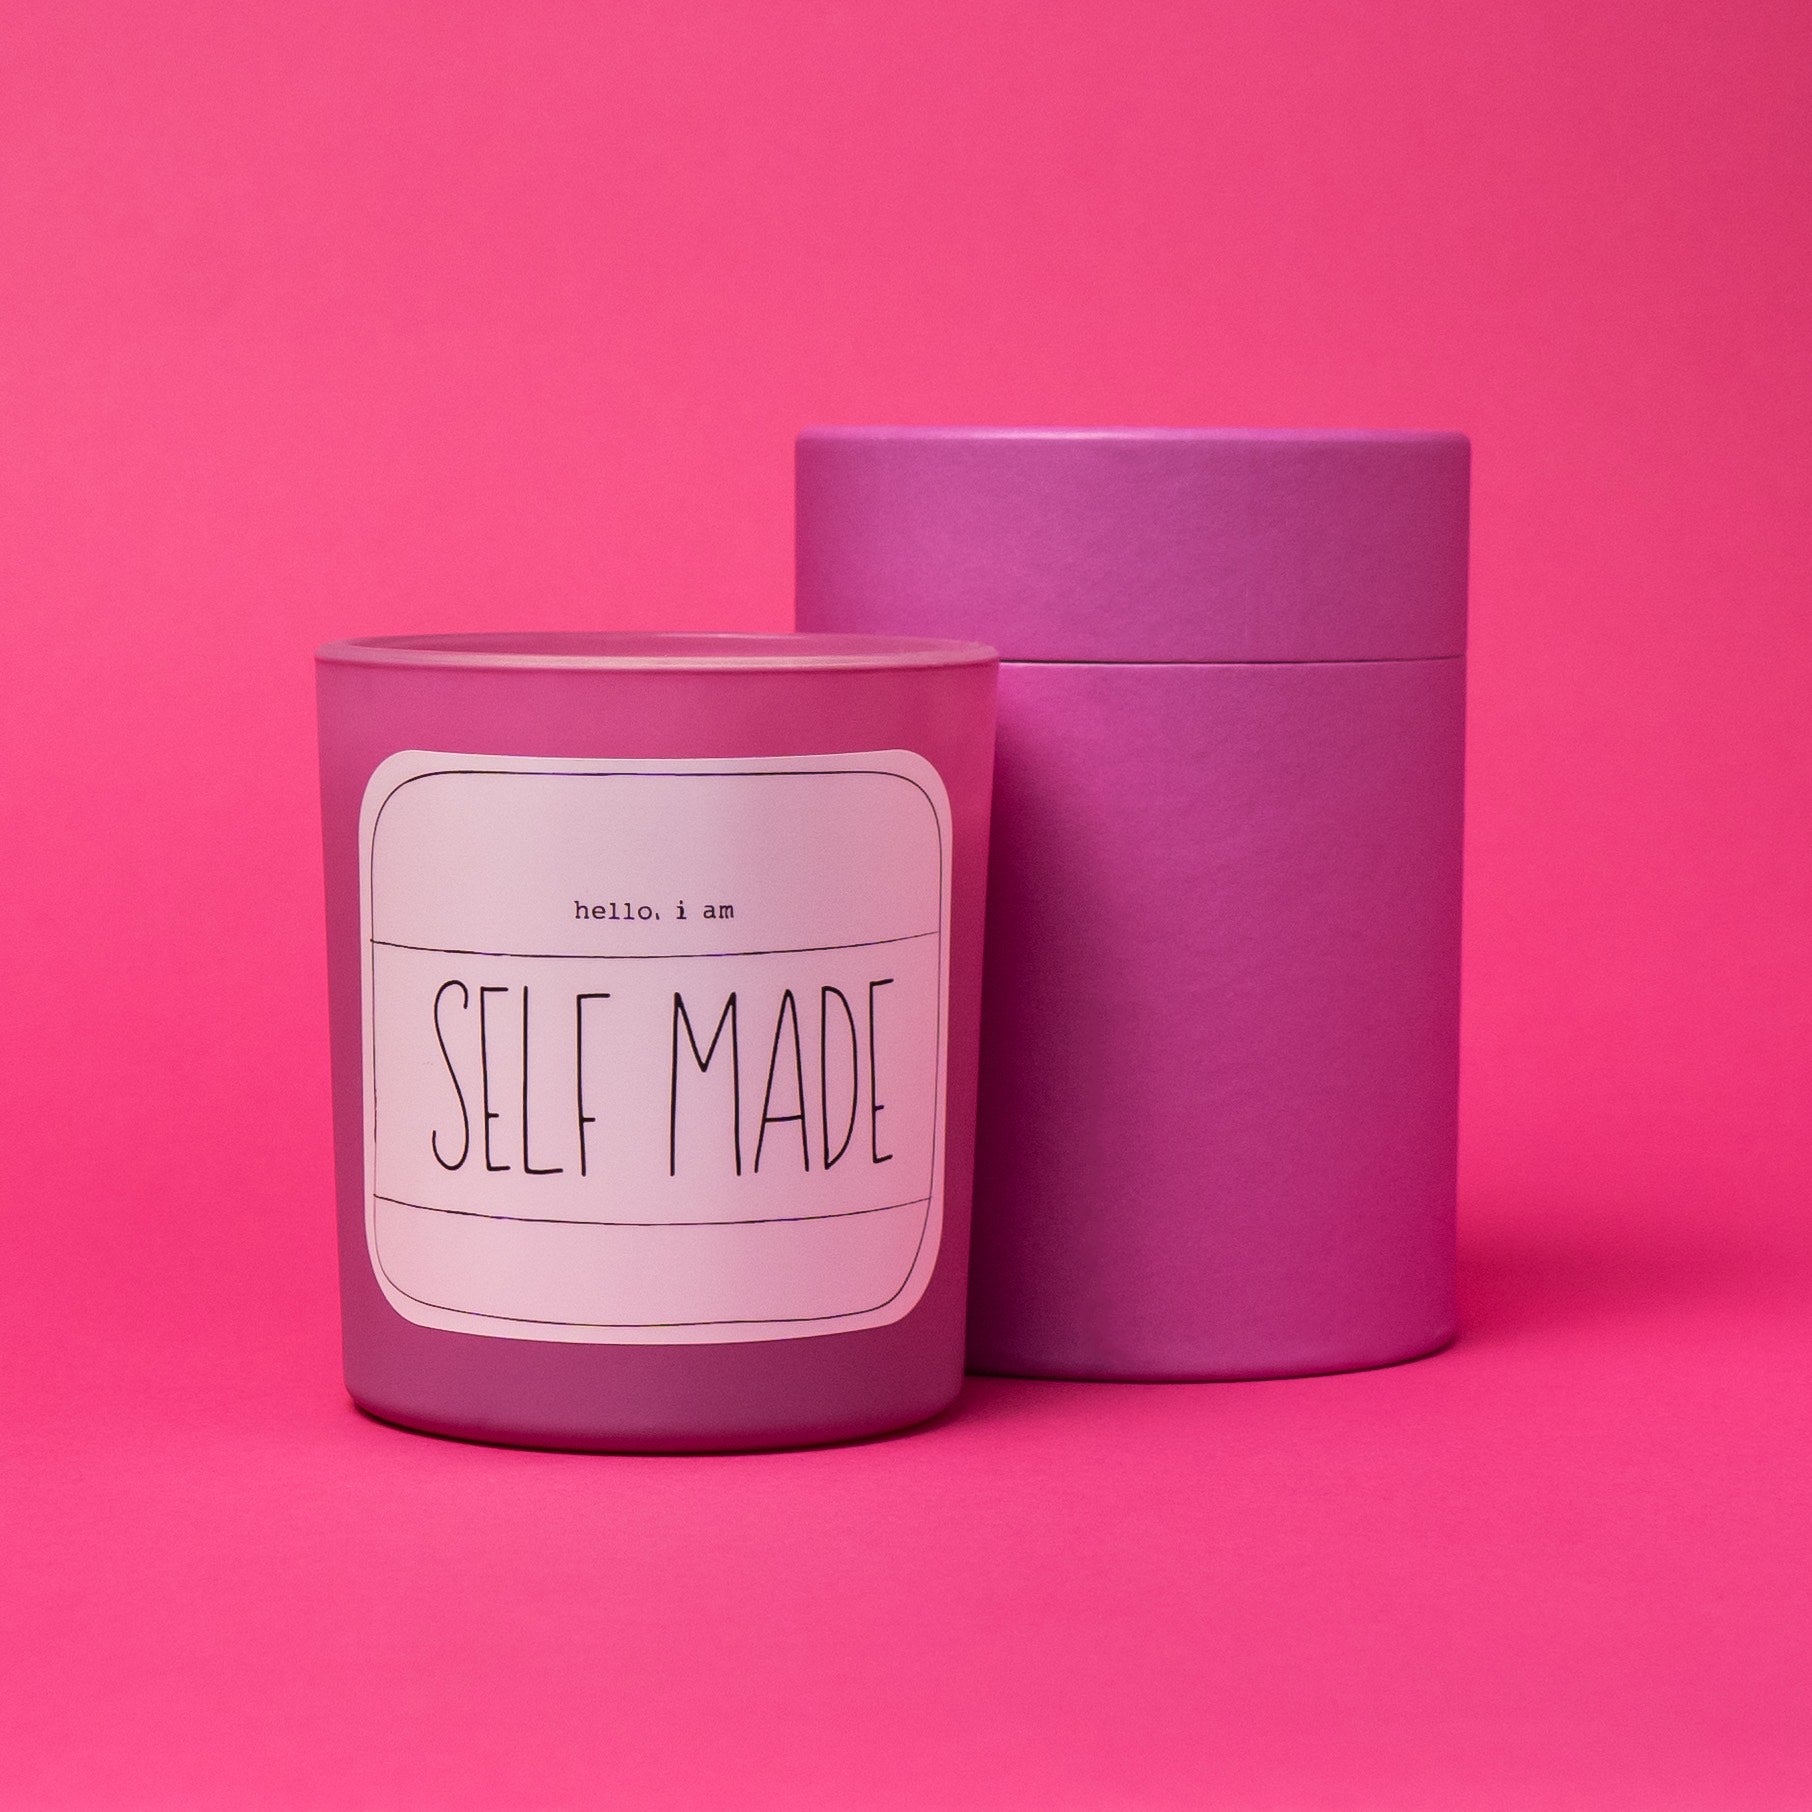 Self Made Candle - New Mindset, Who Dis?